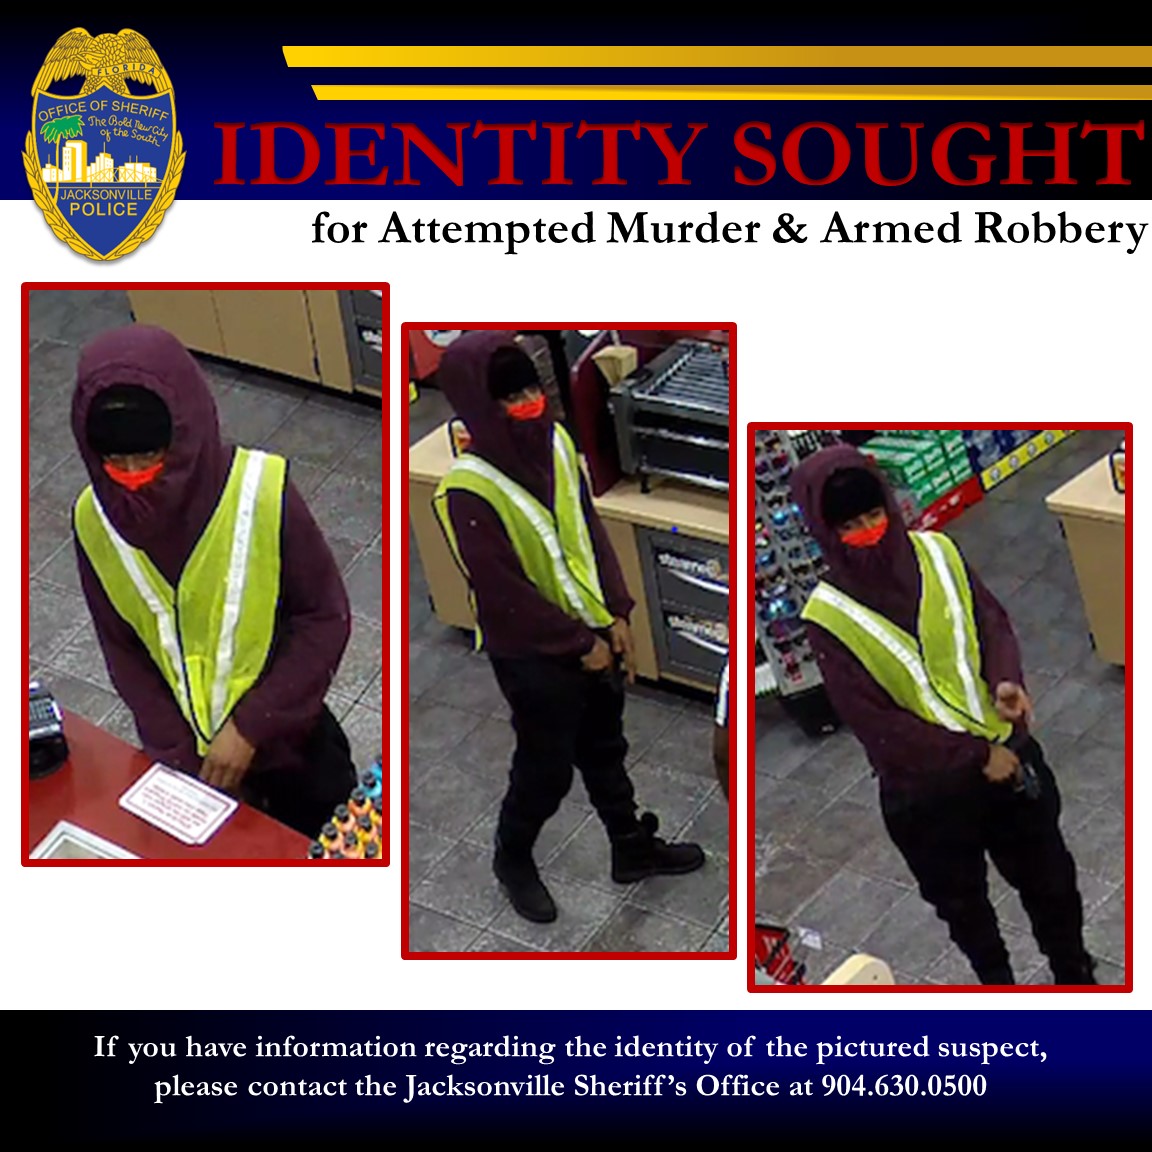 Suspect Sought for Attempted Murder The Jacksonville Sheriff’s Office is currently investigating an Attempted Murder and Armed Robbery, and we are asking for the community’s assistance in identifying the suspect. On Thursday, May 9, 2024, shortly before 3:00 a.m., JSO patrol